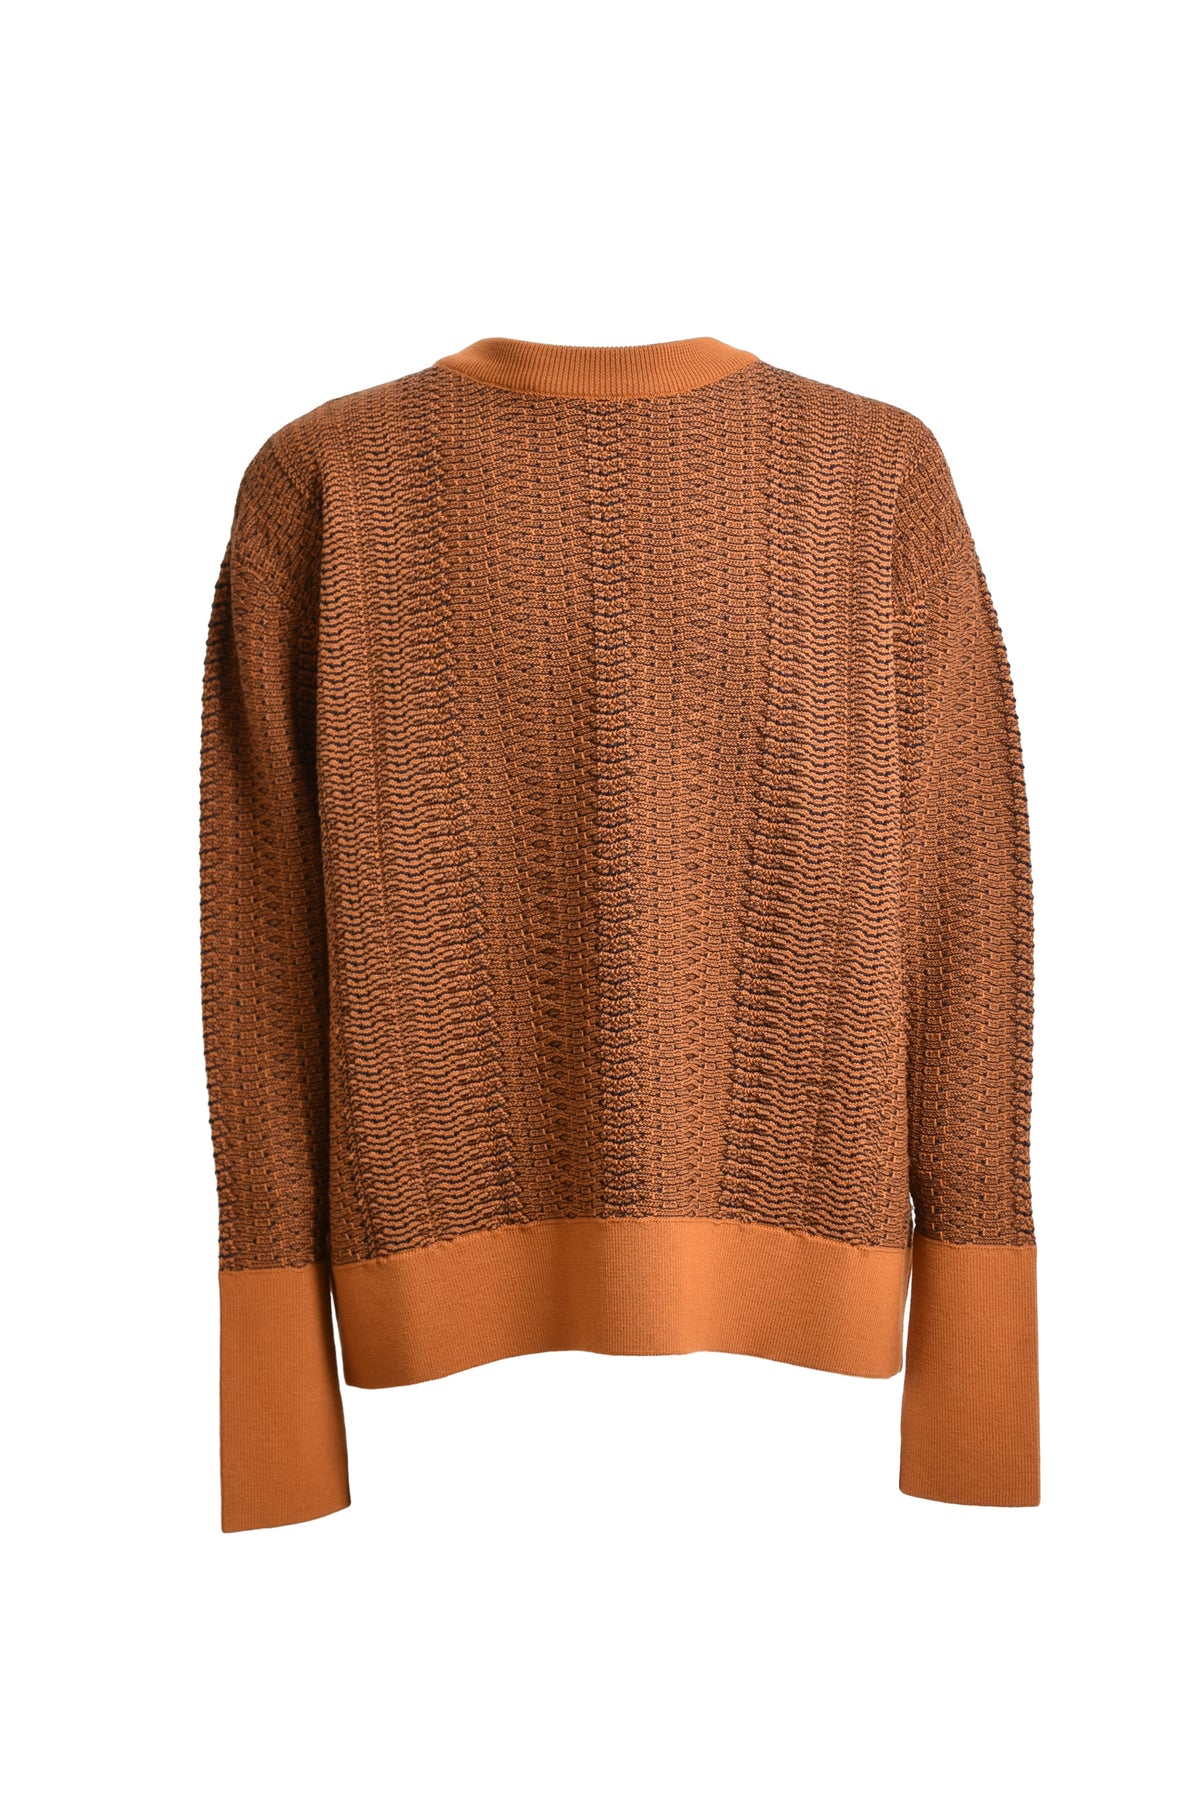 NICHOLAS DALEY WAVE KNITTED CREW NECK / ORG NVY